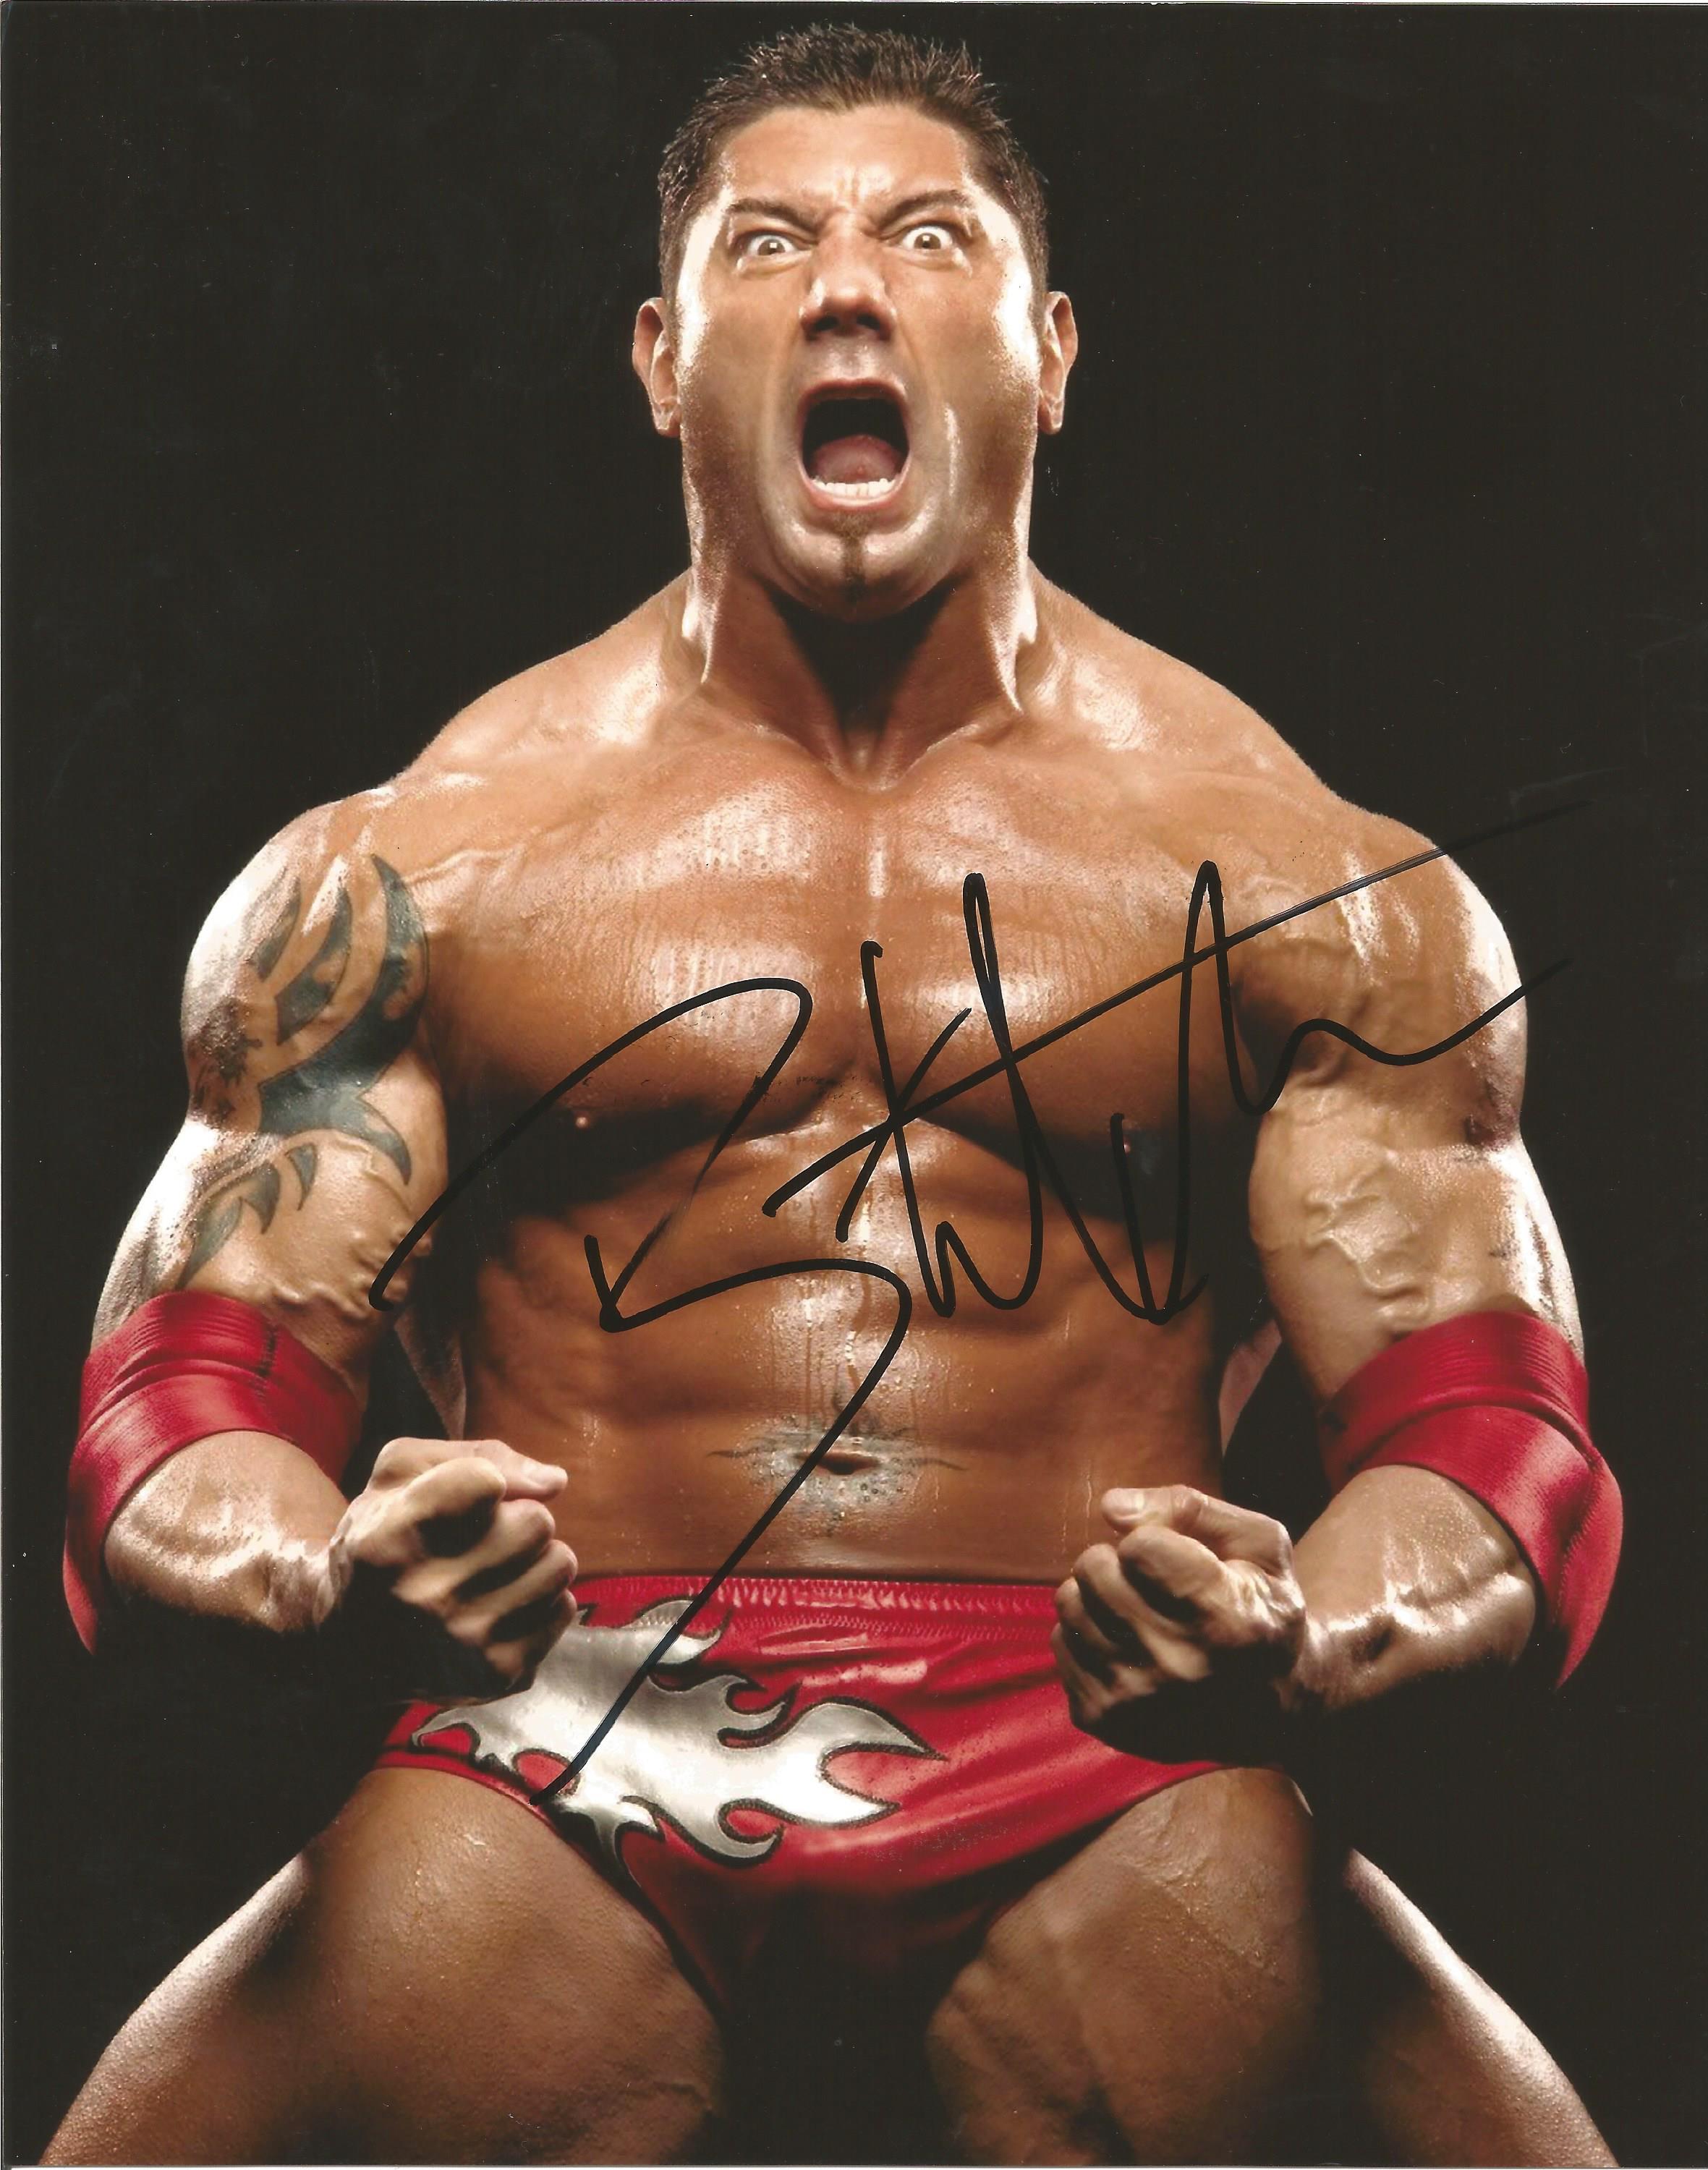 Batista signed 10 x 8 colour WWE Wrestler Portrait Photo, from in person collection autographed at